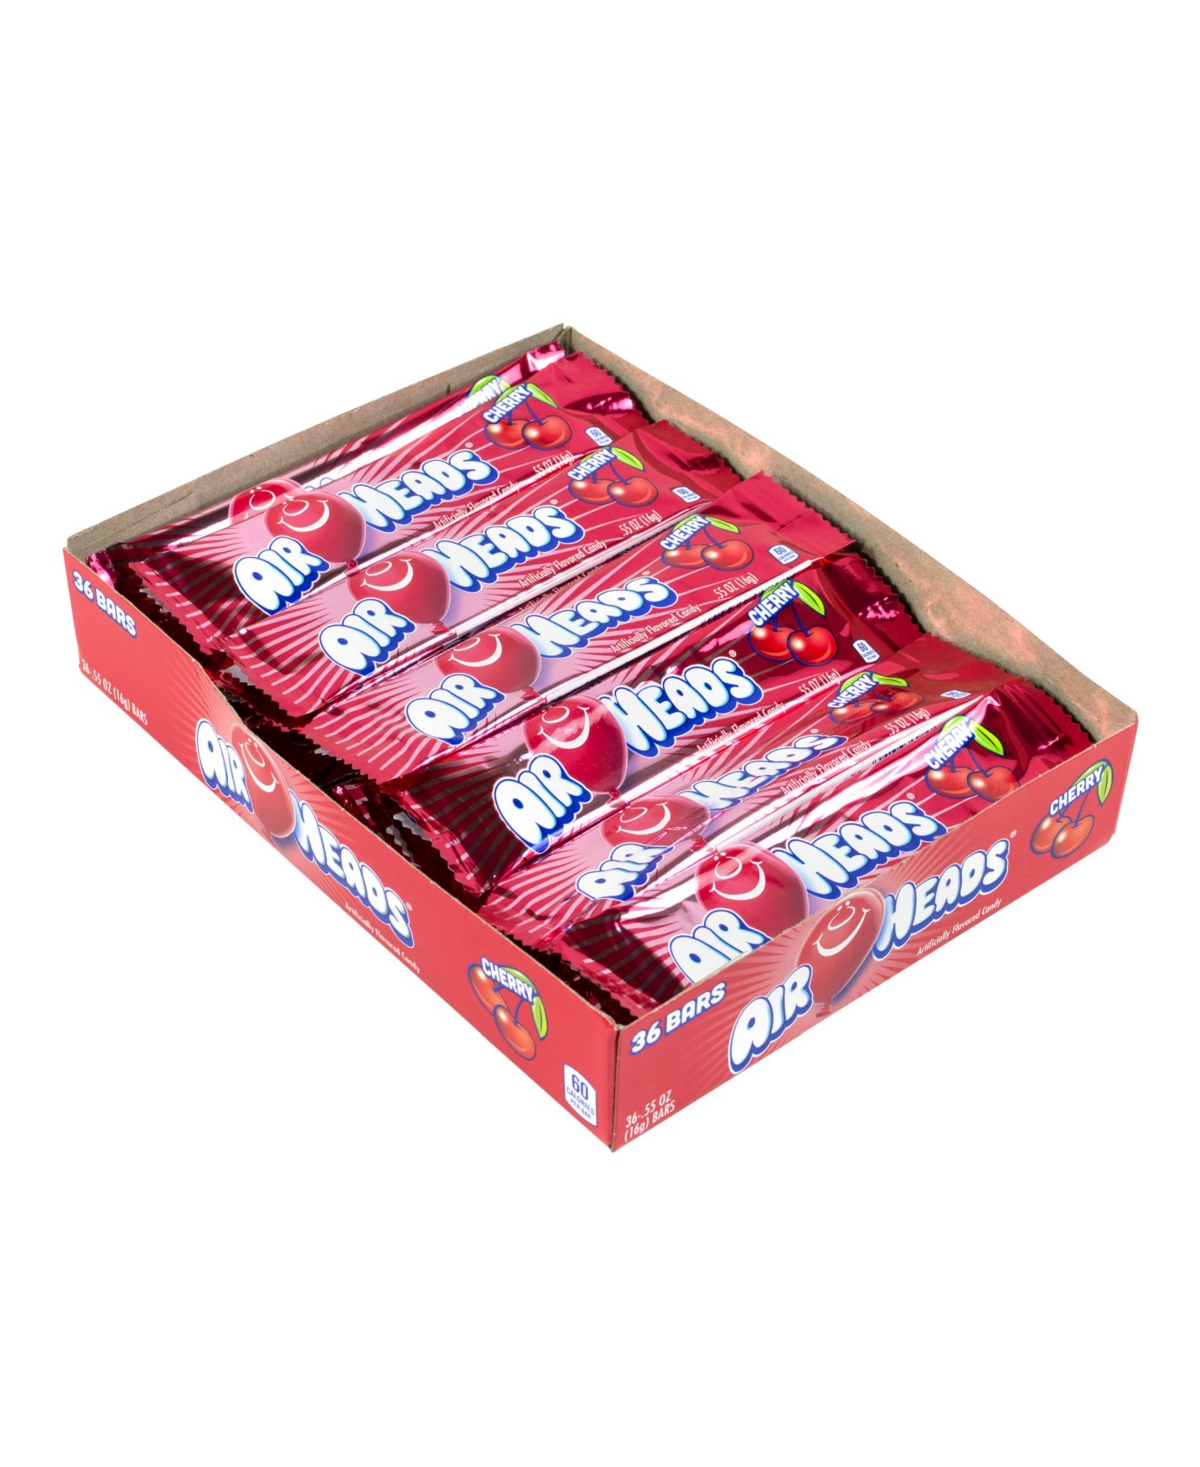 UPC 073390002015 product image for Airheads Cherry Bar, 36 Count | upcitemdb.com